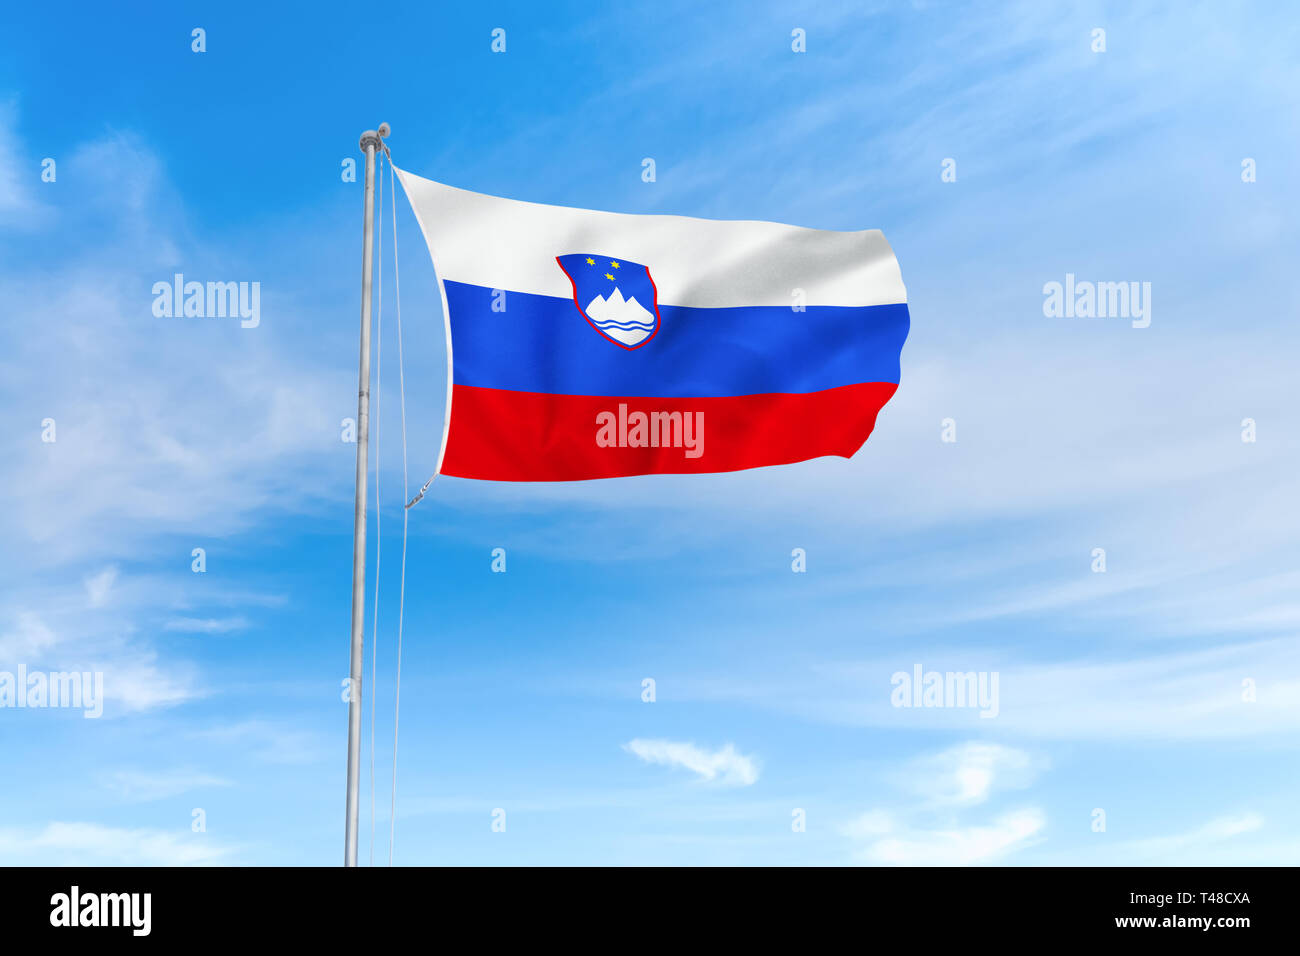 Slovenia flag blowing in the wind over nice blue sky background Stock Photo